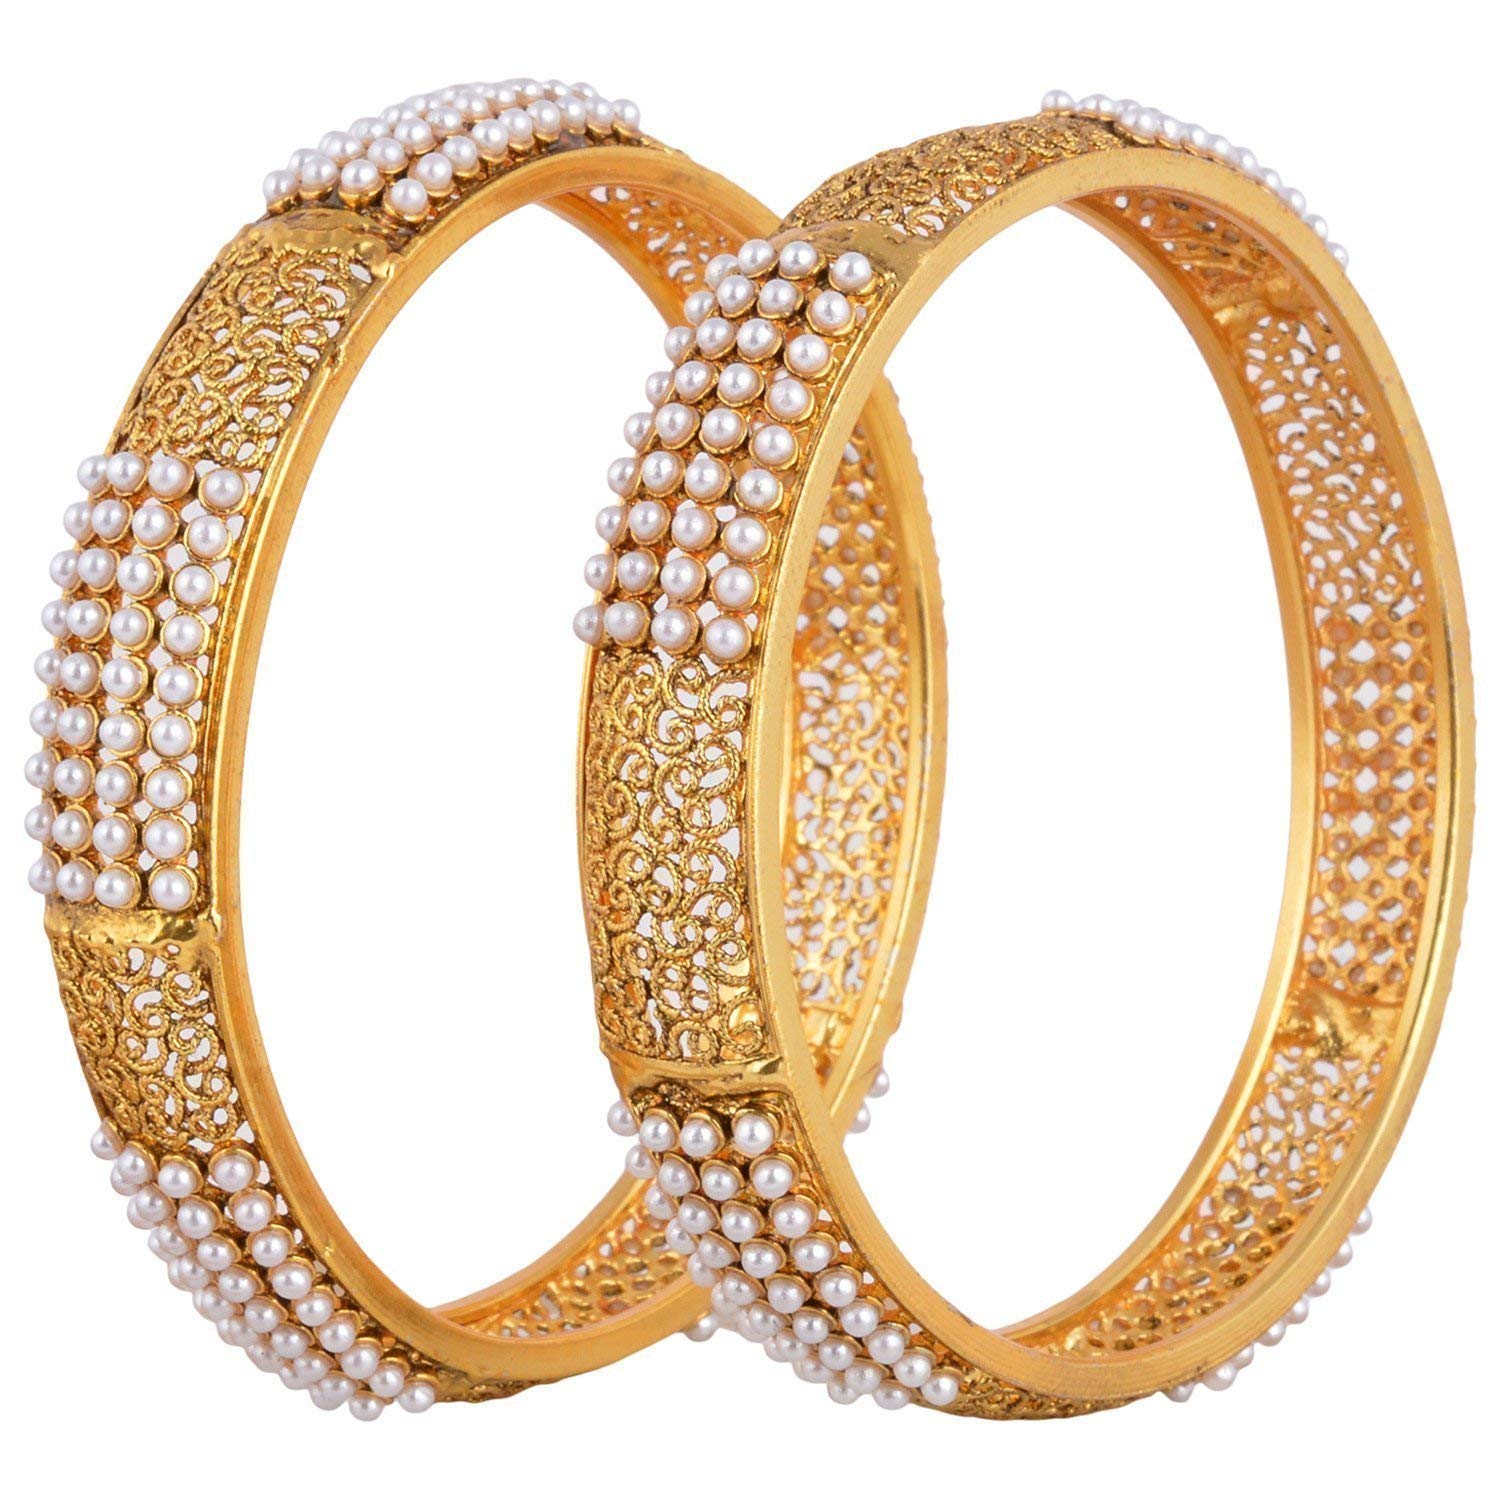 Buy Shining Diva Gold Plated Traditional Jewellery Pearl Bangles for ...